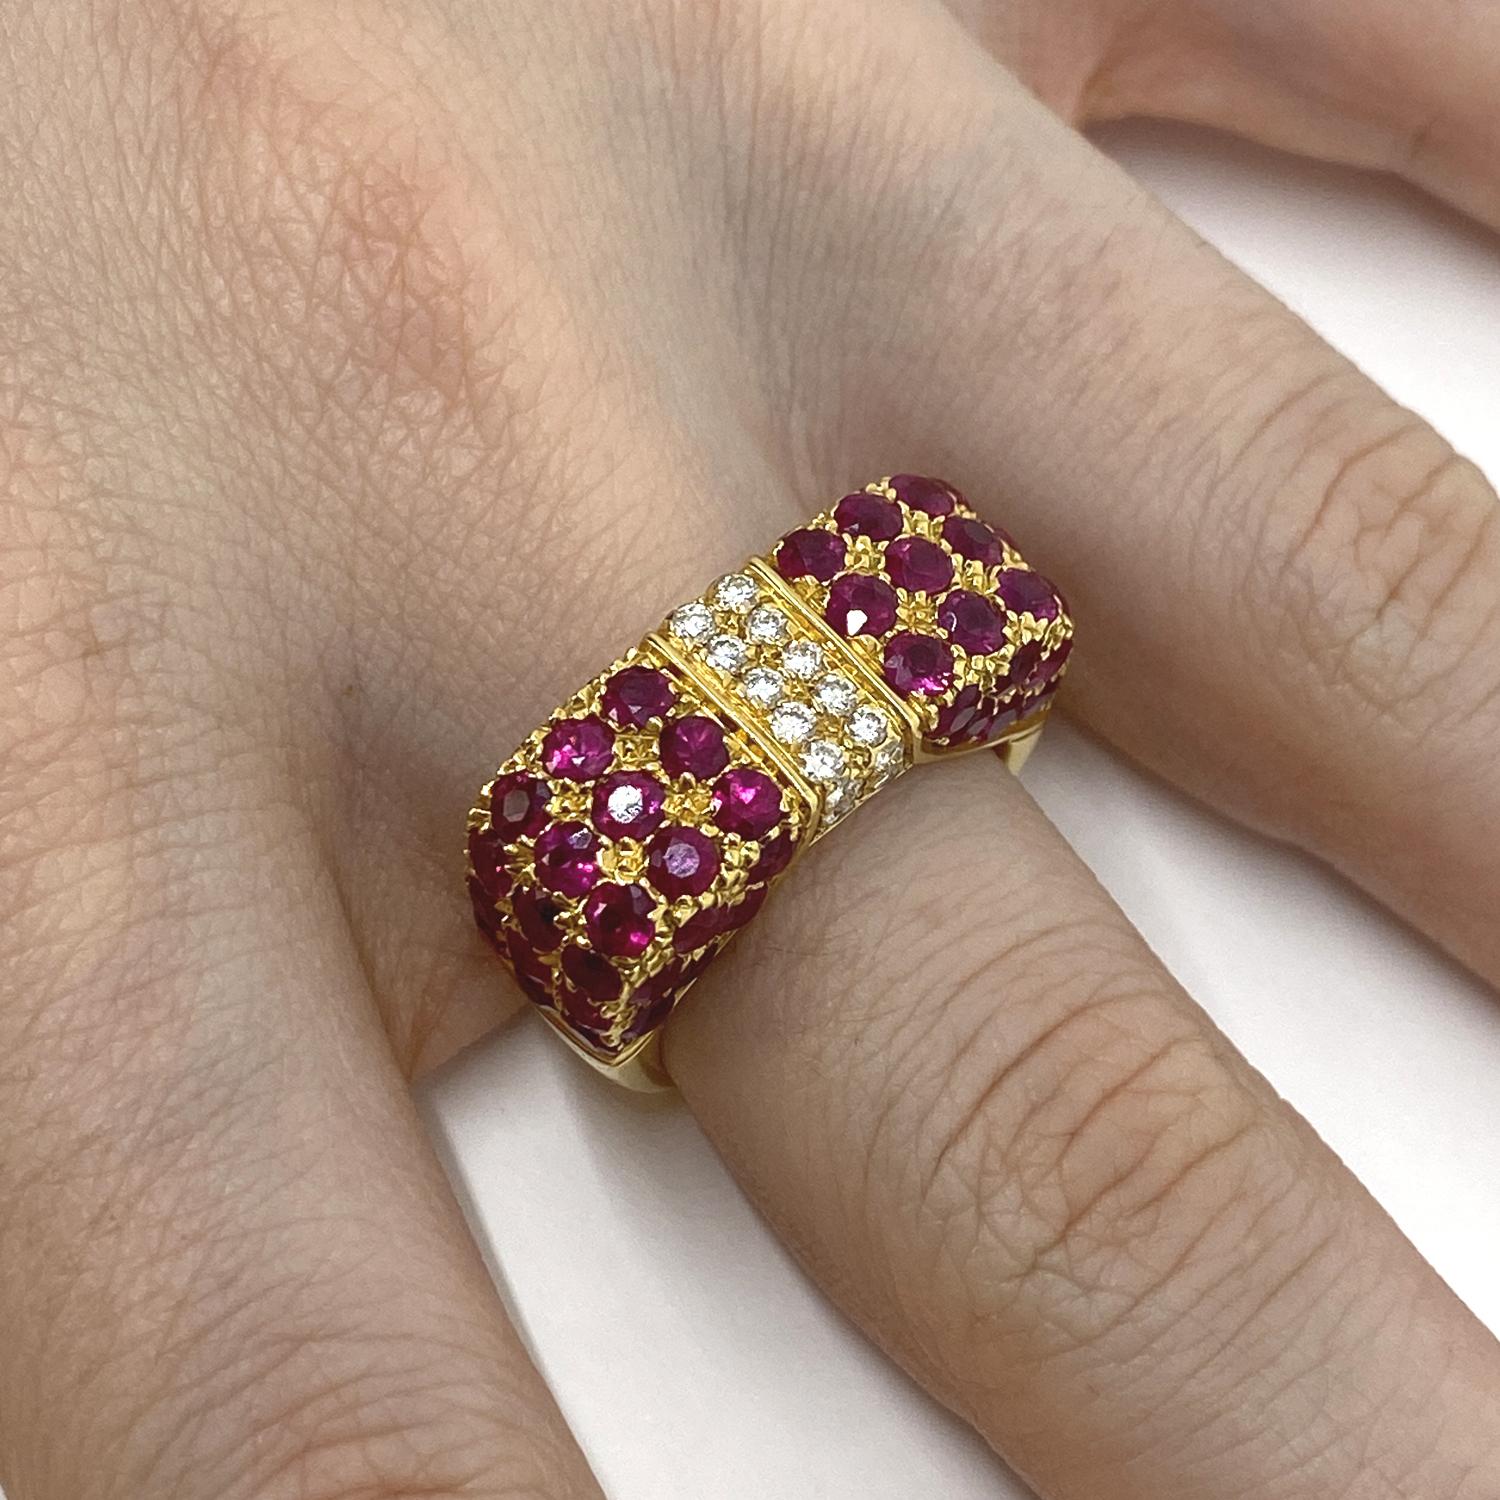 Ring made of 18kt yellow gold with brilliant-cut rubies for ct.5.90 and natural white brilliant-cut diamonds for ct.0.40
-------------------------------------------------

Important Note : In order to speed up the publishing process of our vast